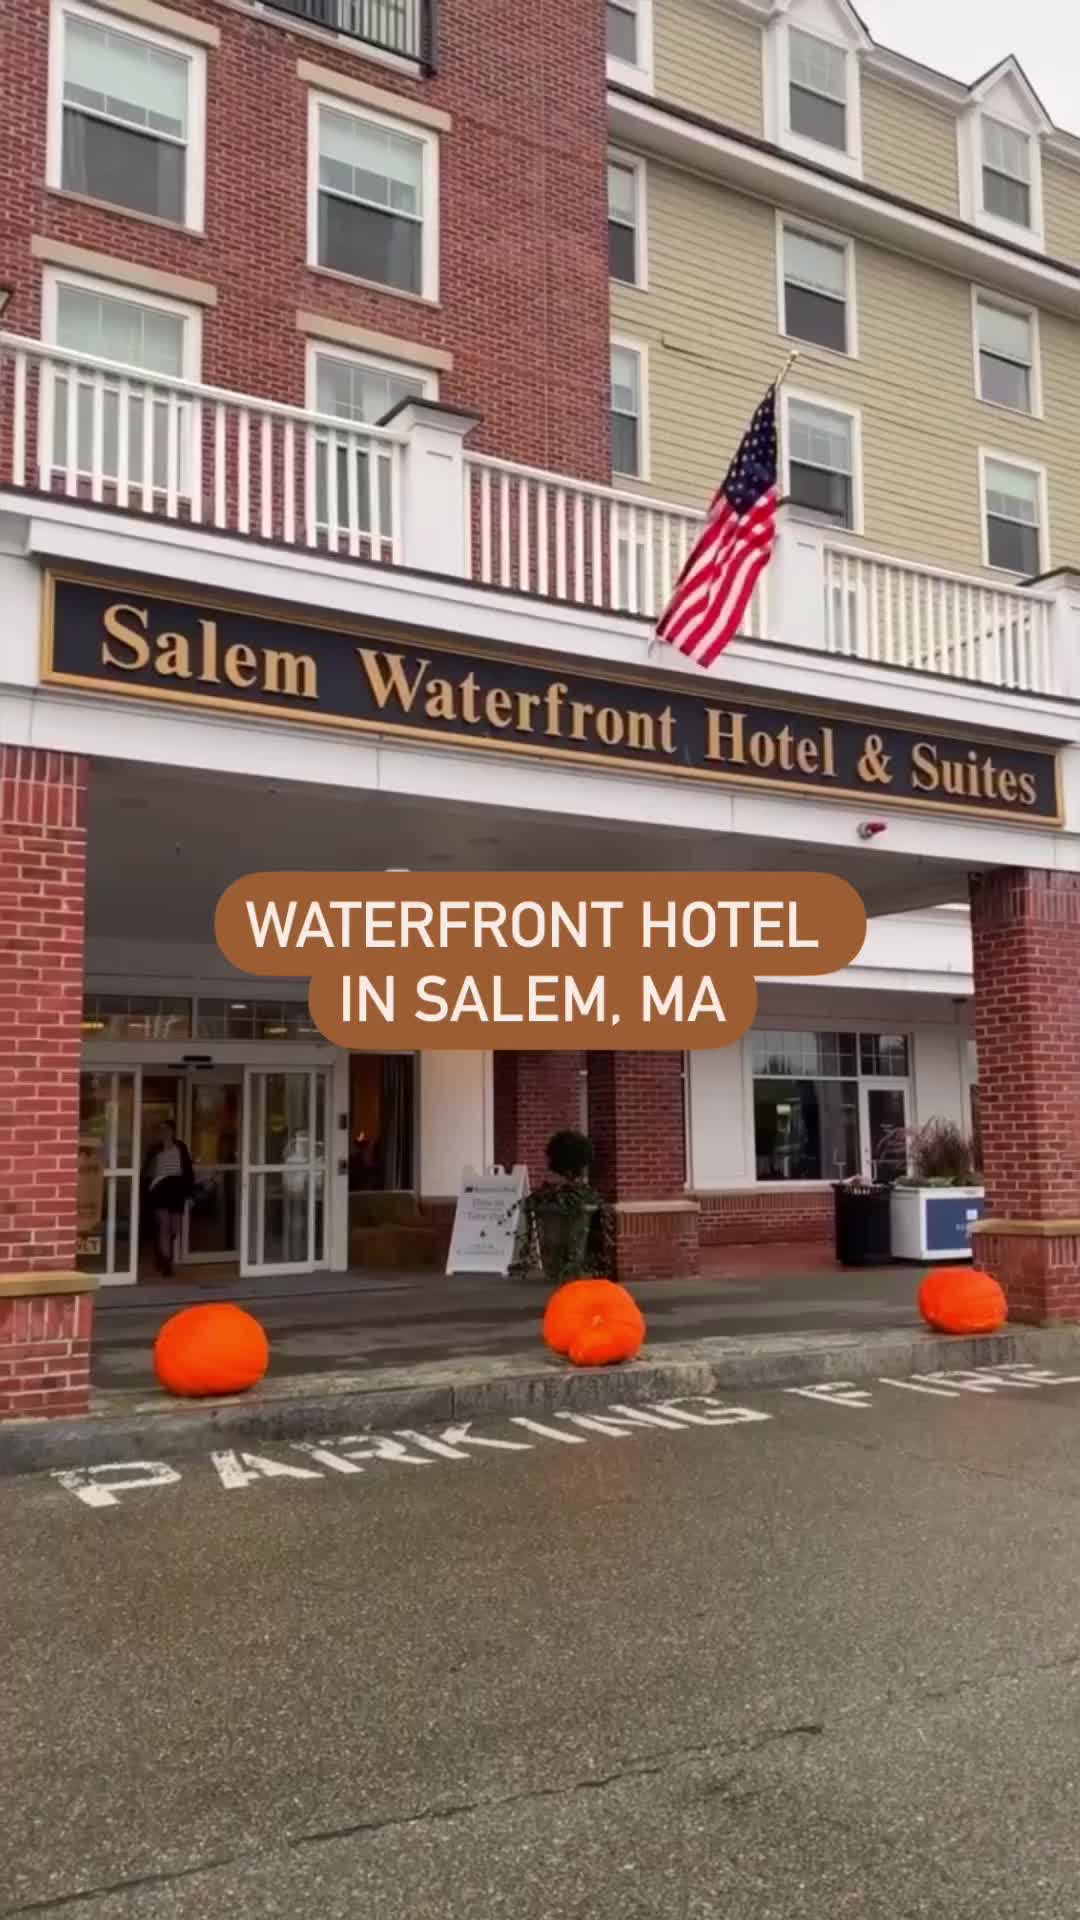 Cozy Stays at Salem Waterfront Hotel in Massachusetts